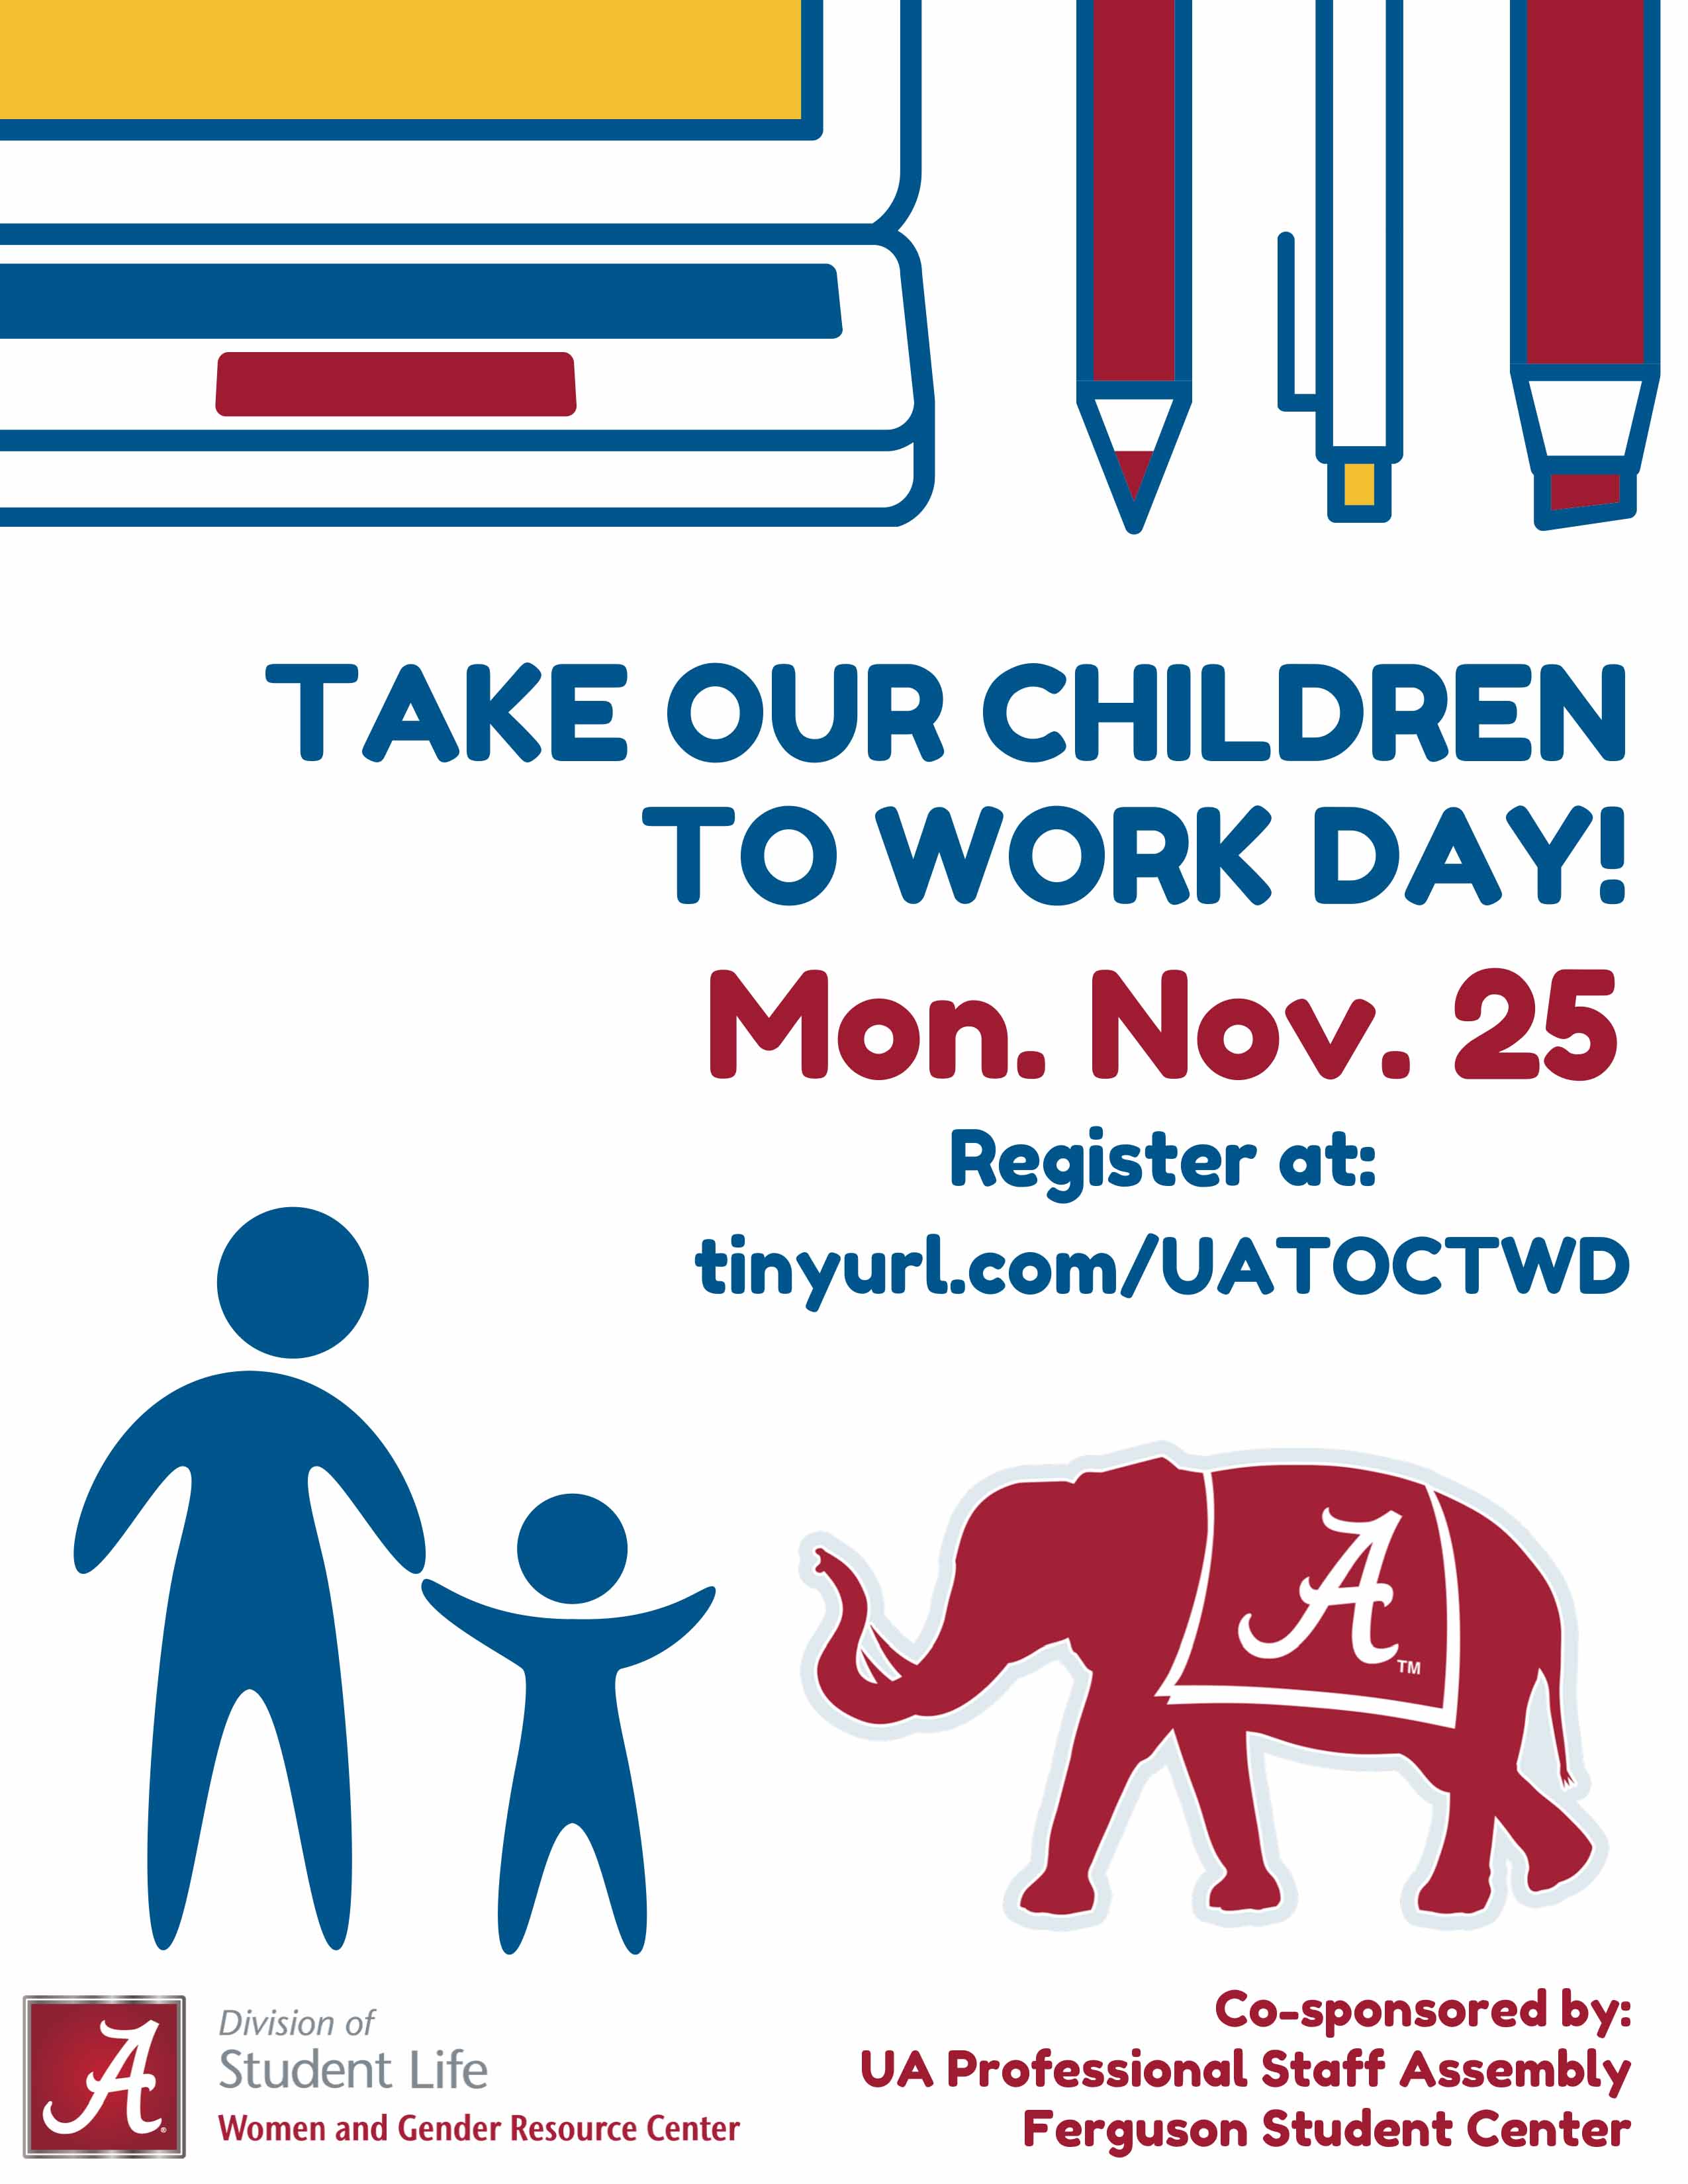 register-now-for-take-our-children-to-work-day-university-of-alabama-news